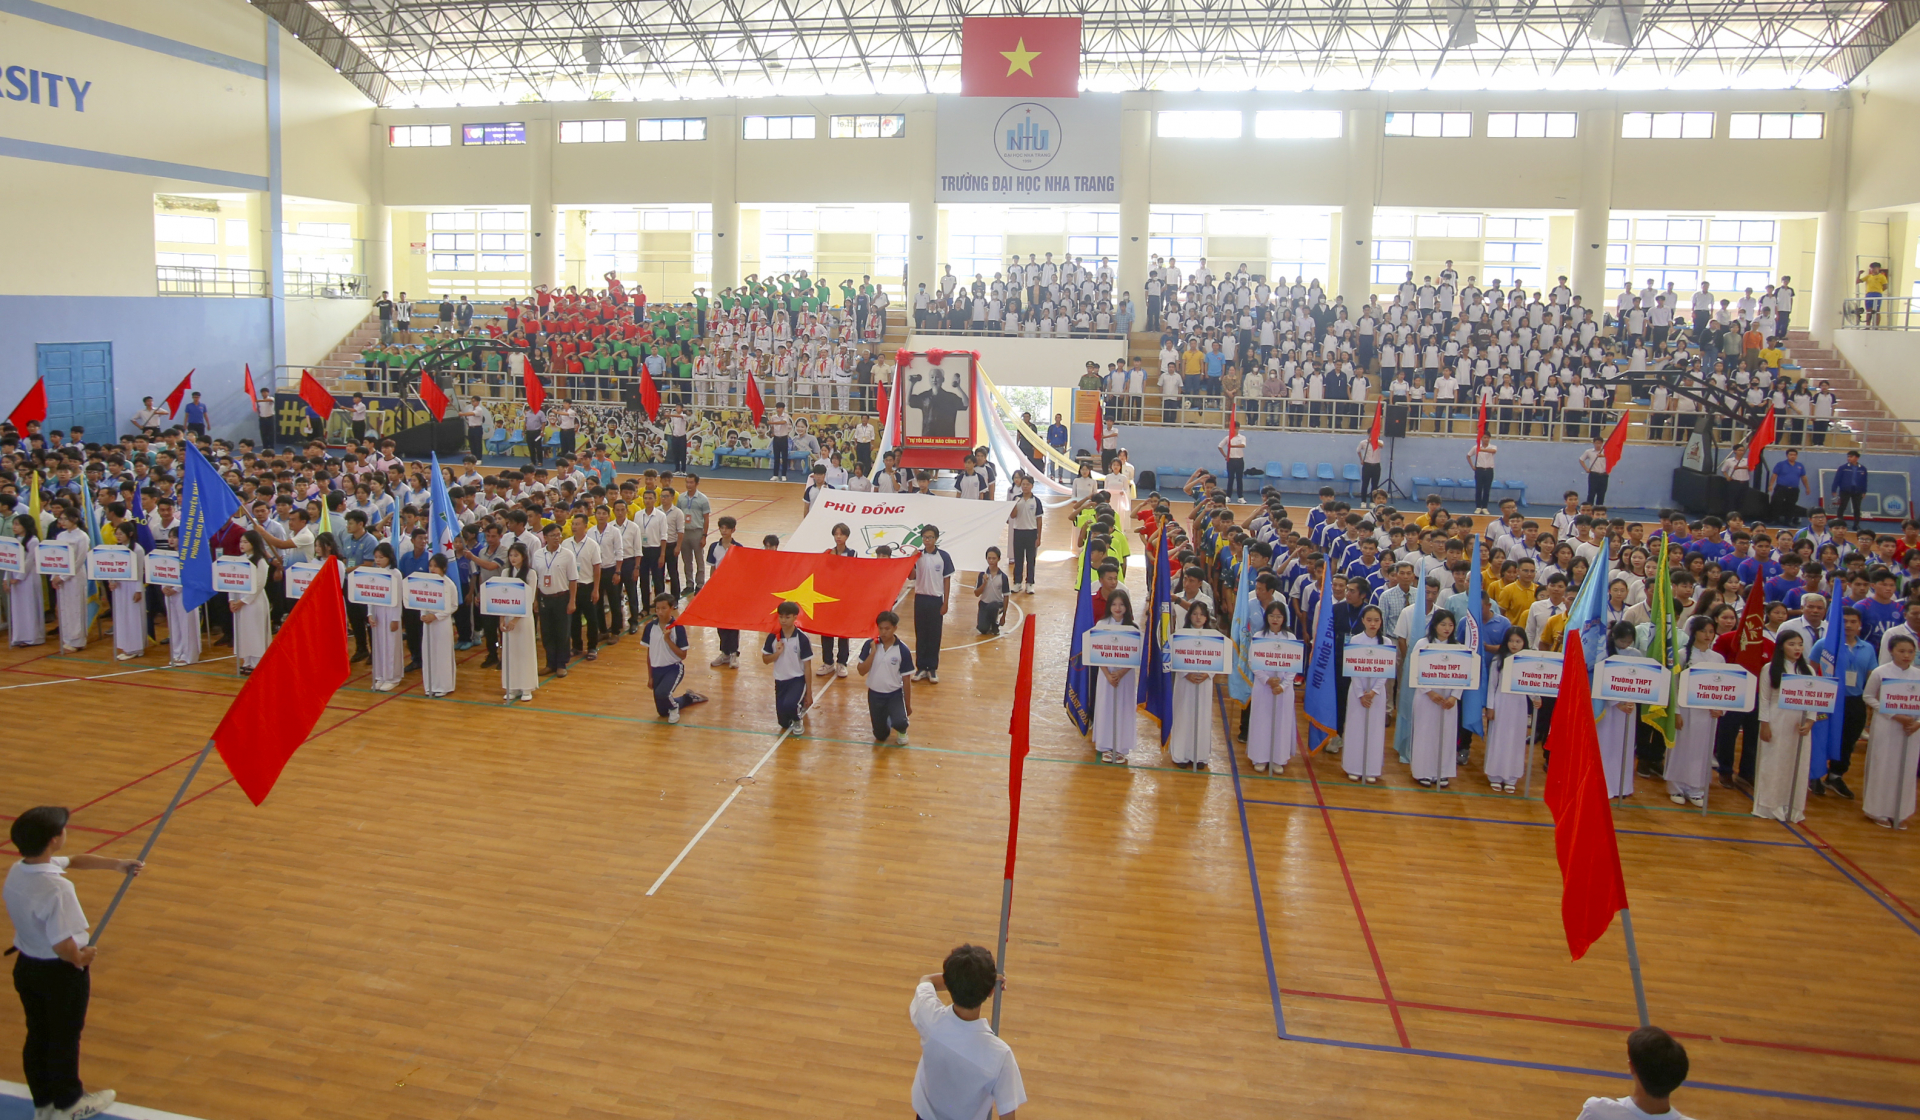 Over 3,000 people join Khanh Hoa’s 2023-2024 school year Phu Dong sports festival 

